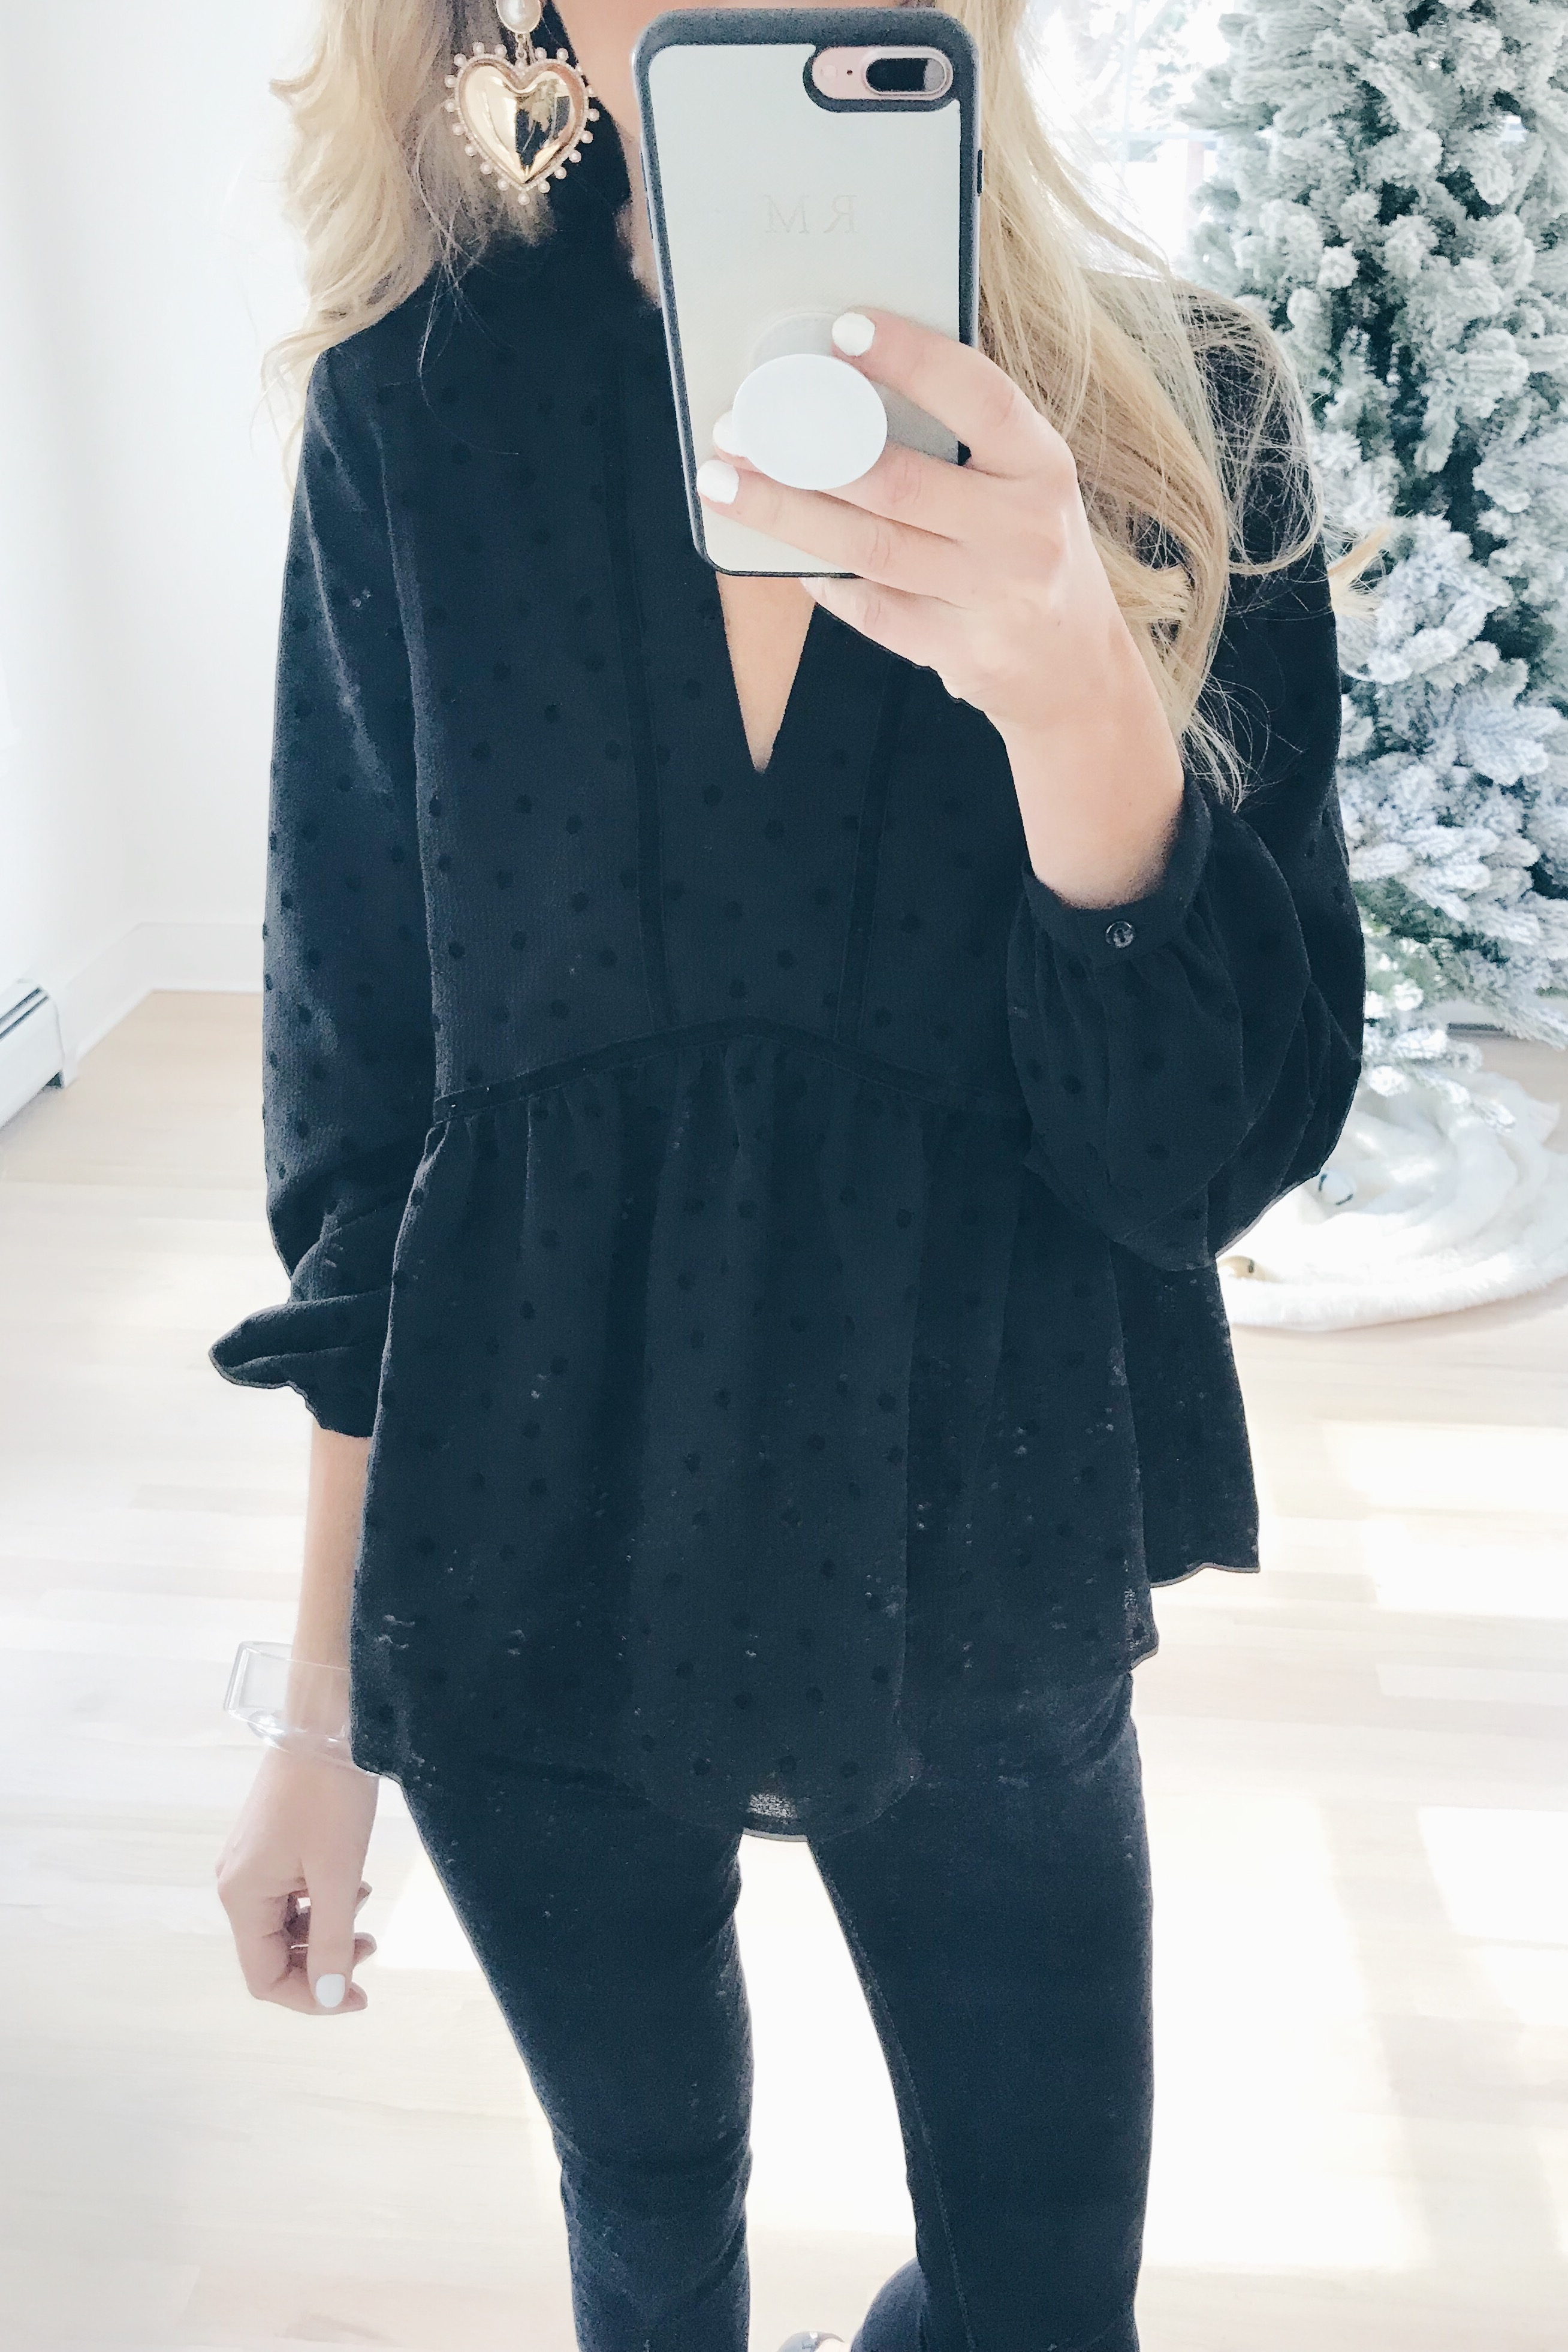  holiday outfit ideas - black peplum blouse from gibson glam collection on pinteresting plans blog